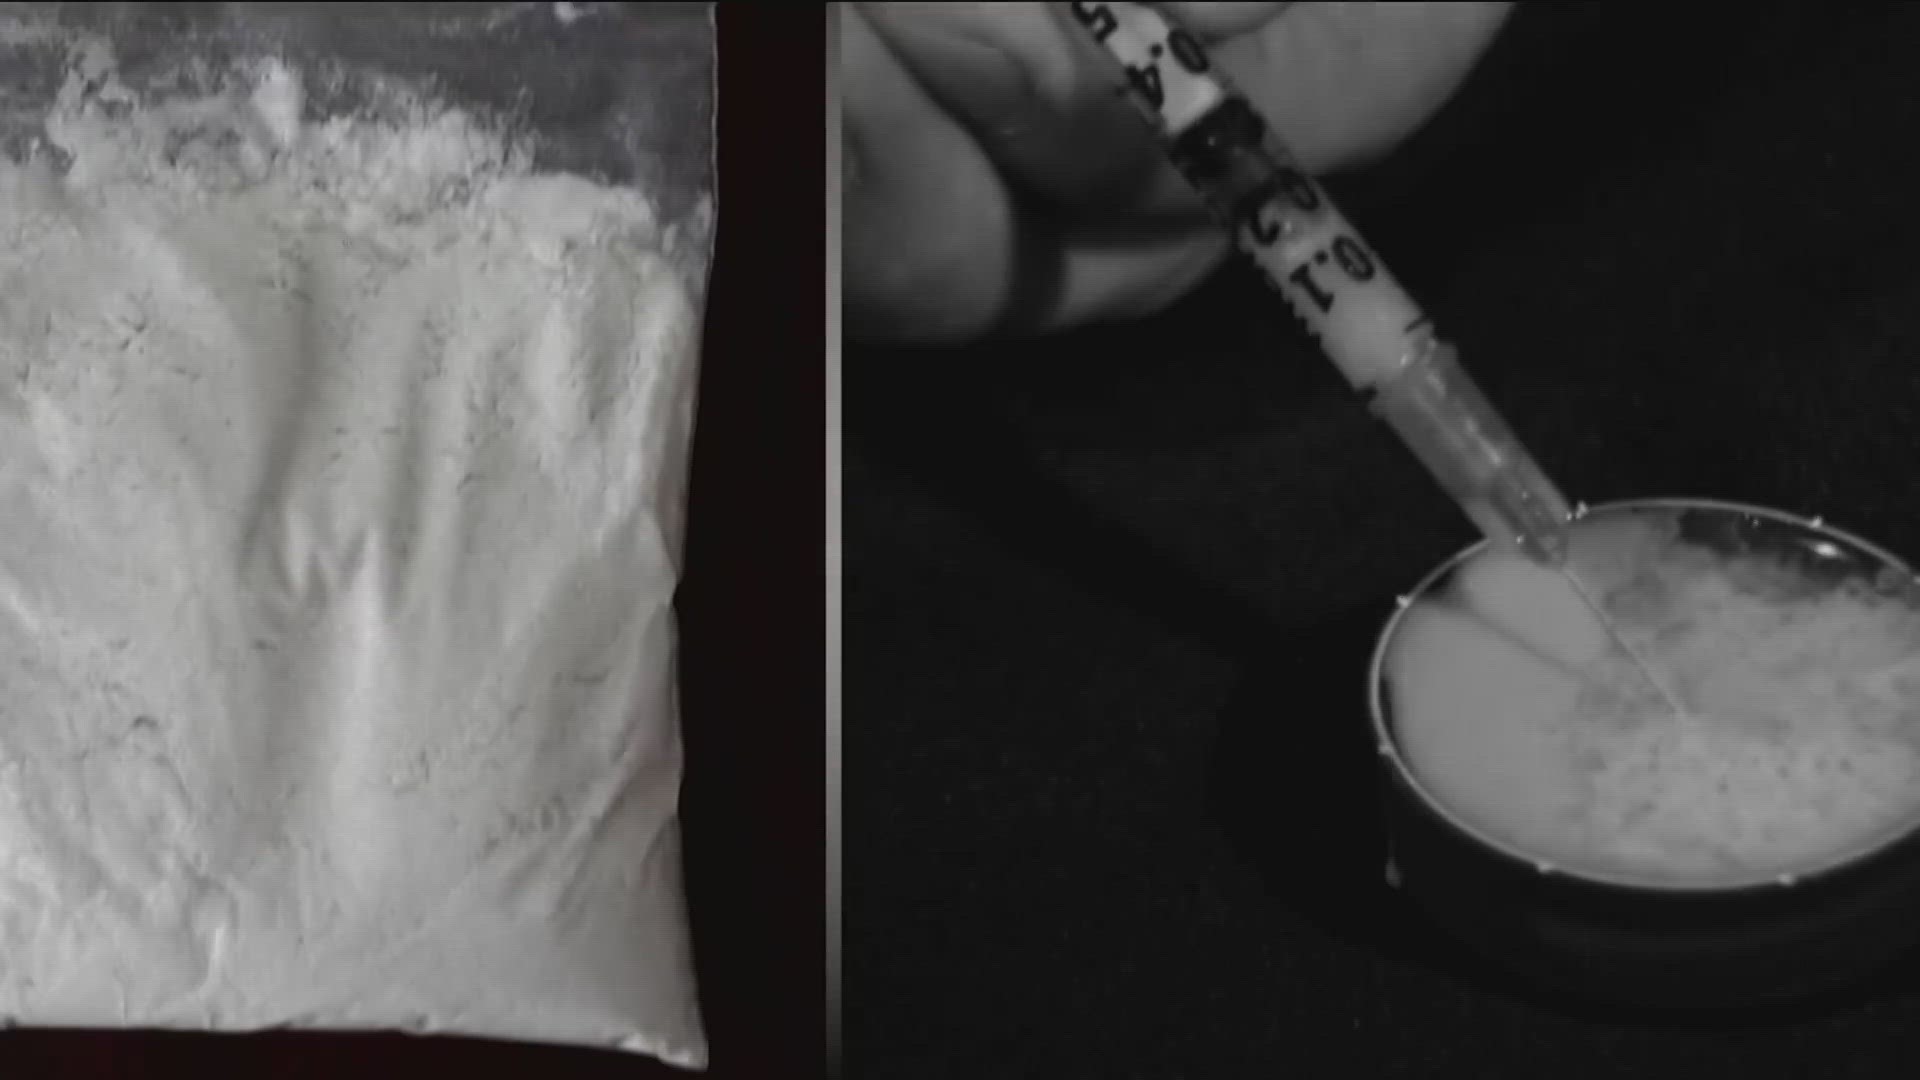 The drug puts users in a zombie-like state and if mixed with fentanyl could be deadly.